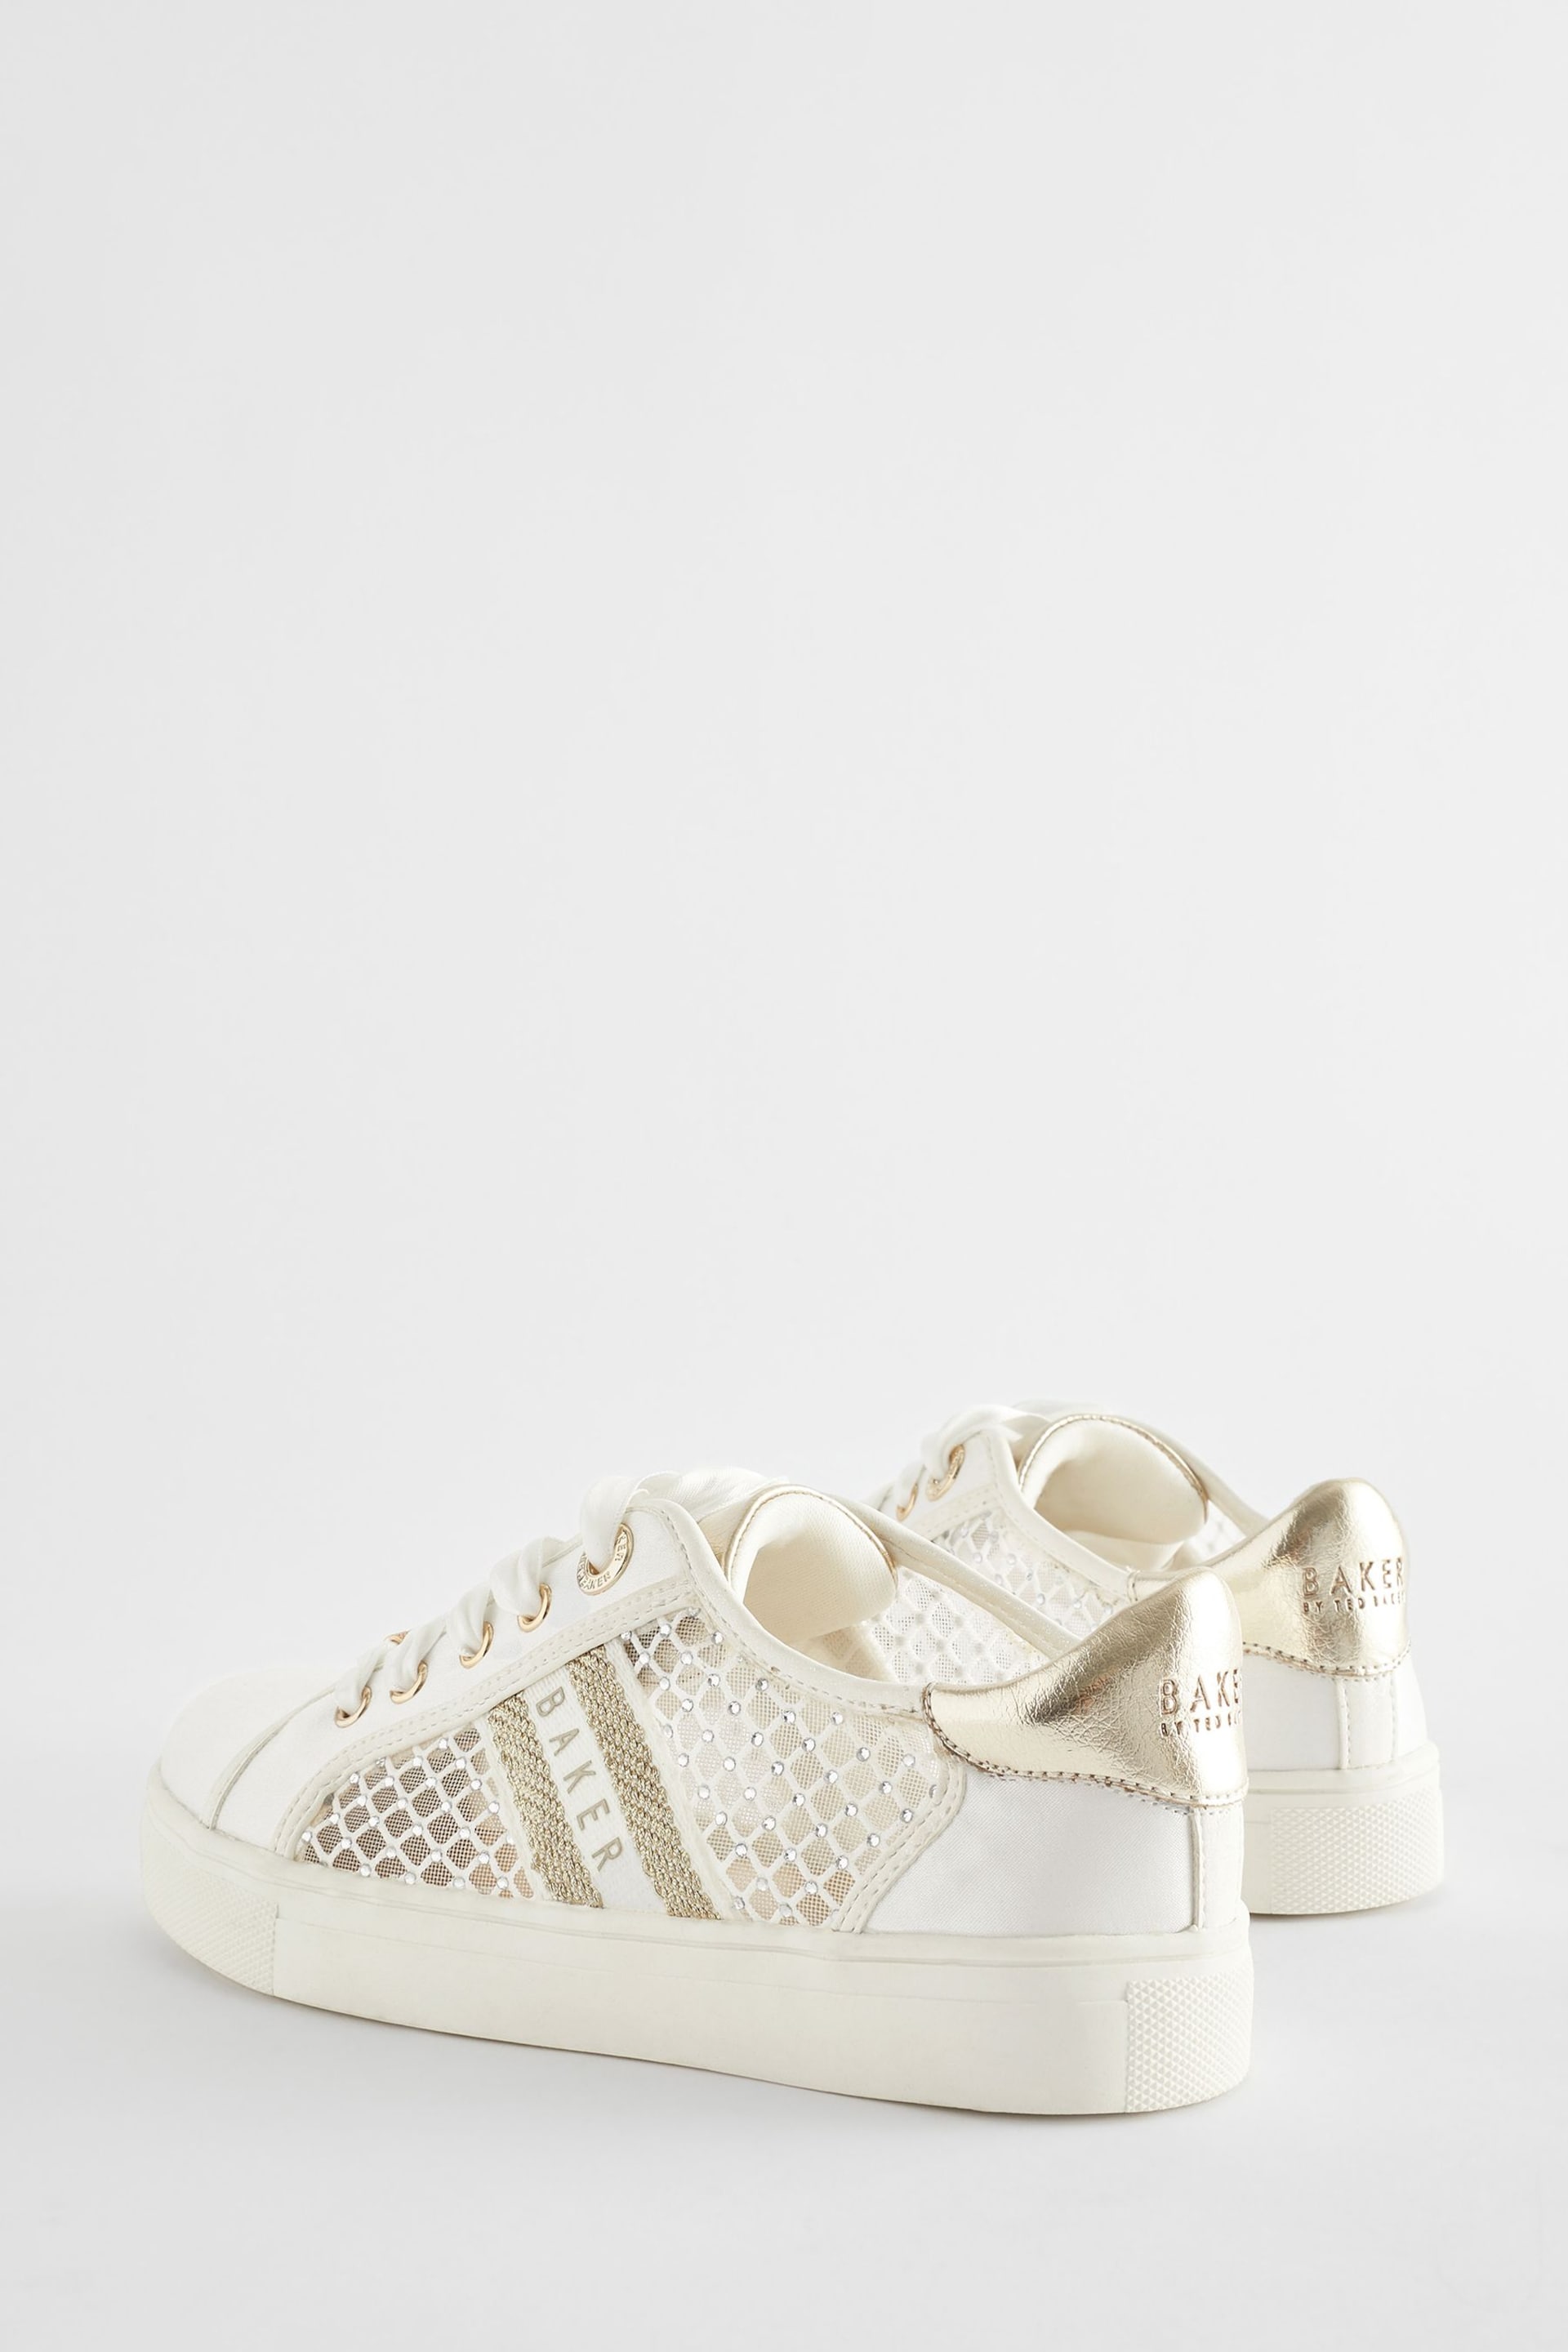 Baker by Ted Baker Girls Diamanté Lace Up Trainers - Image 4 of 7